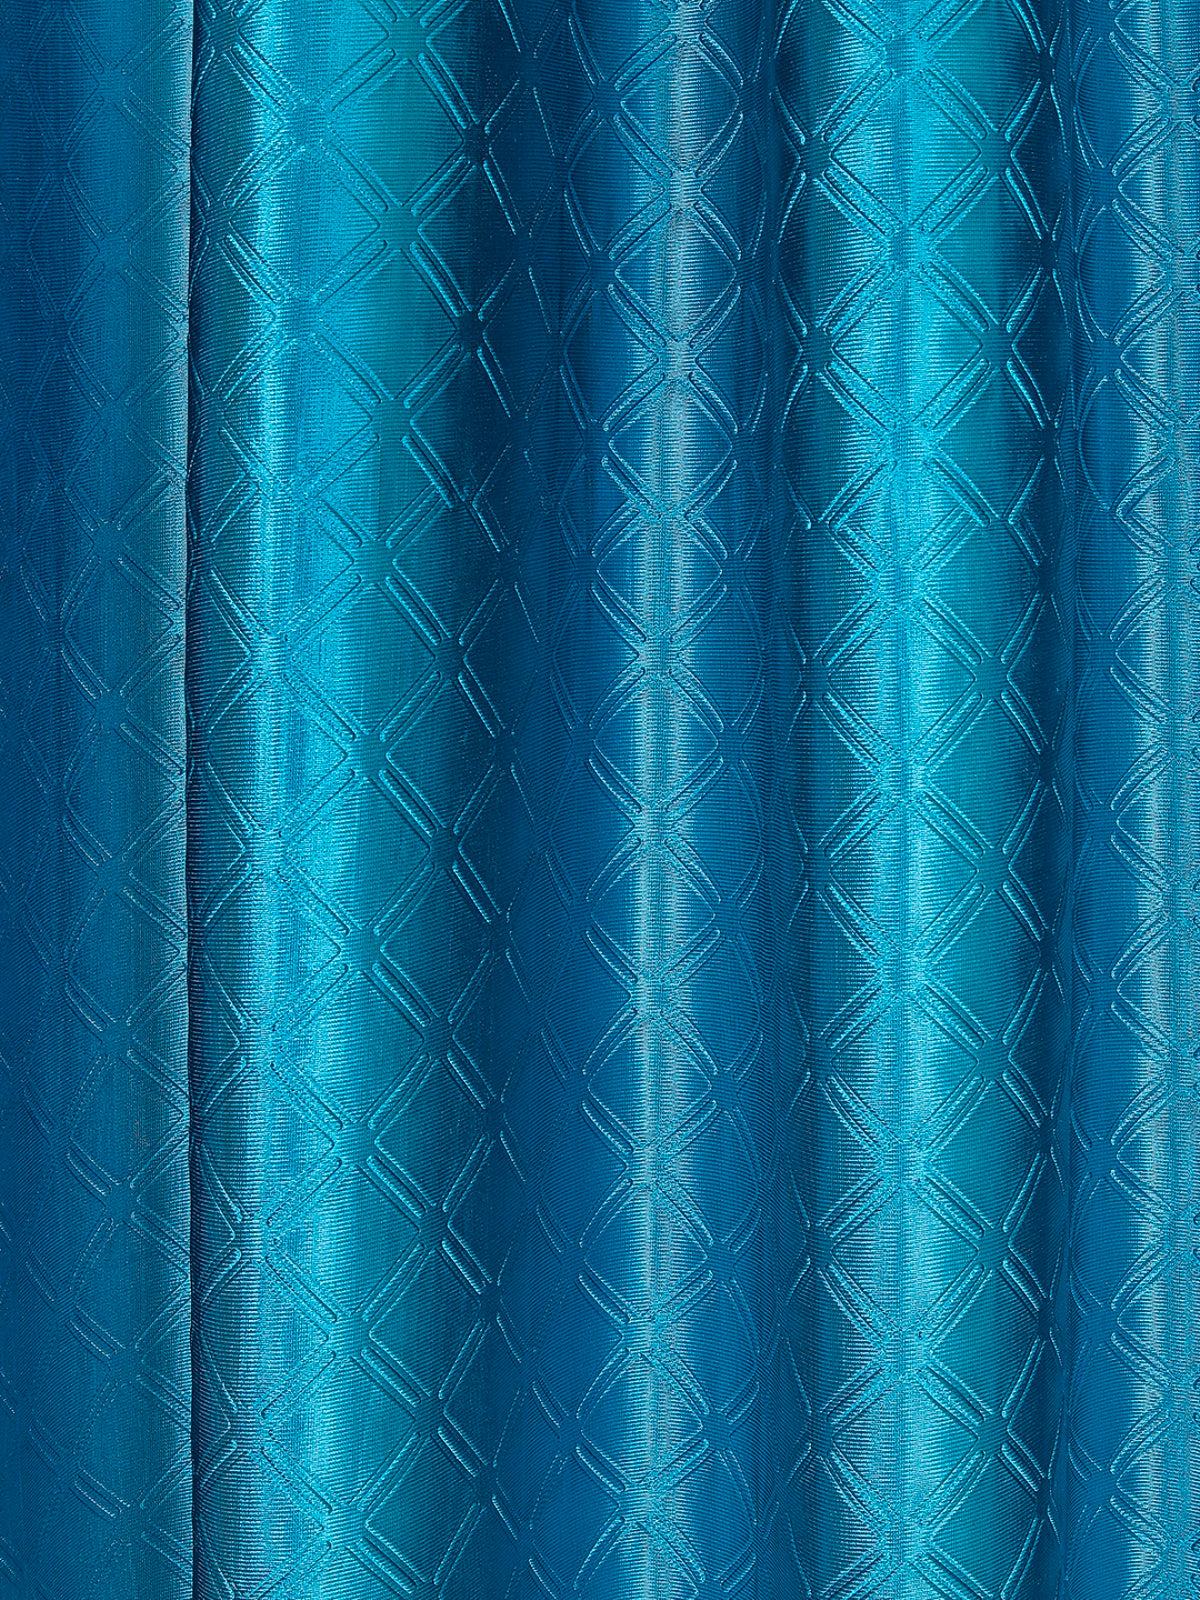 Romee Turquoise Blue Geometric Patterned Set of 2 Long Door Curtains